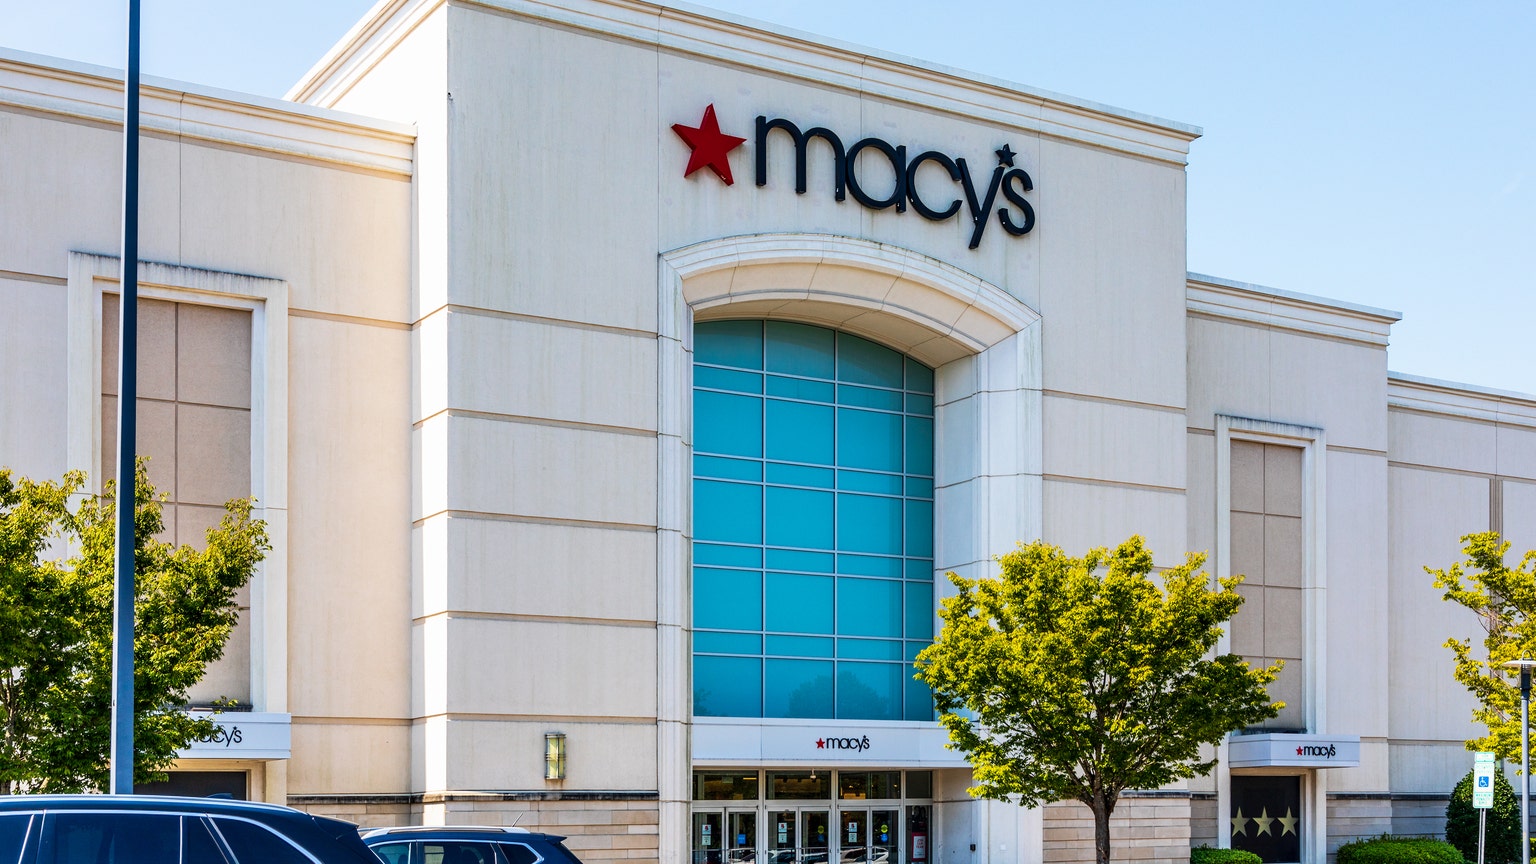 Macy's Business Is Struggling Despite Many Rescue Attempts